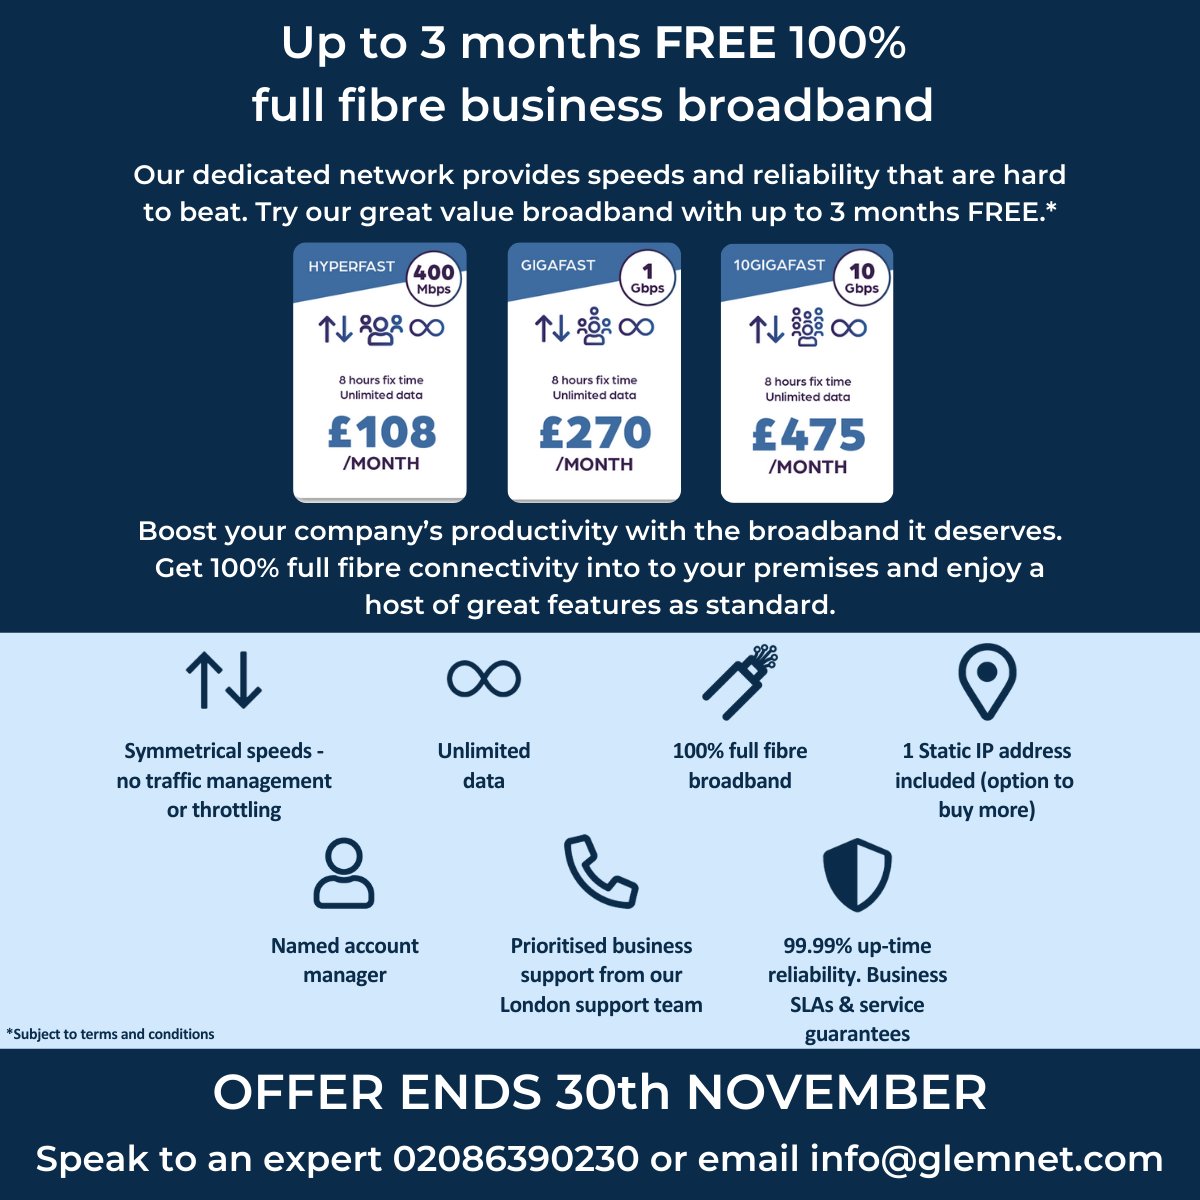 Support your company's ambitions with FREE full fibre business broadband.

Don't miss out on this fantastic deal!
#businessbroadband #fullfibre #telecommunications #technology @CommunityFibre